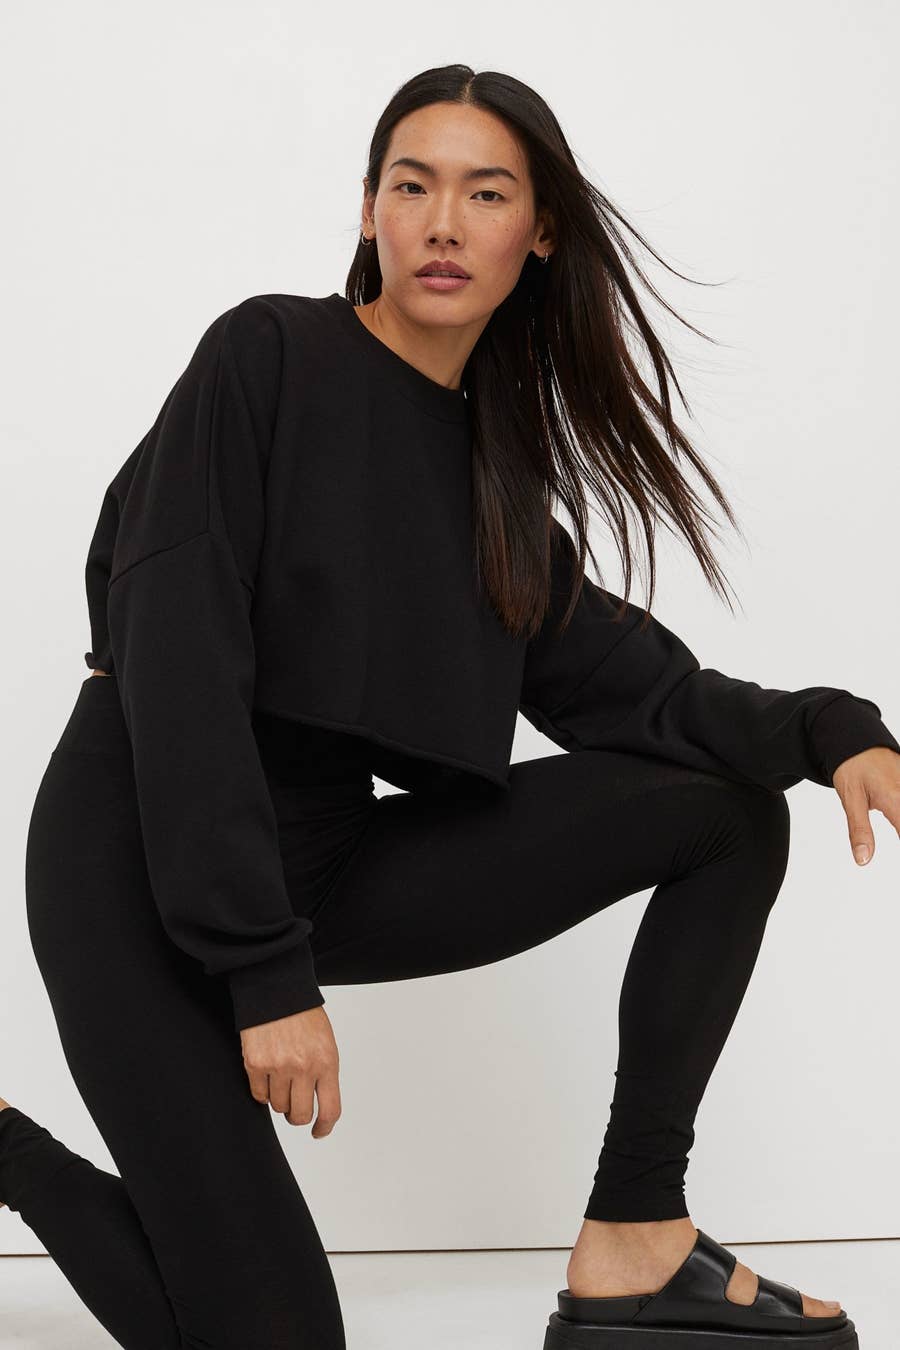 The Perfect Pair Of Black Leggings Does Exist